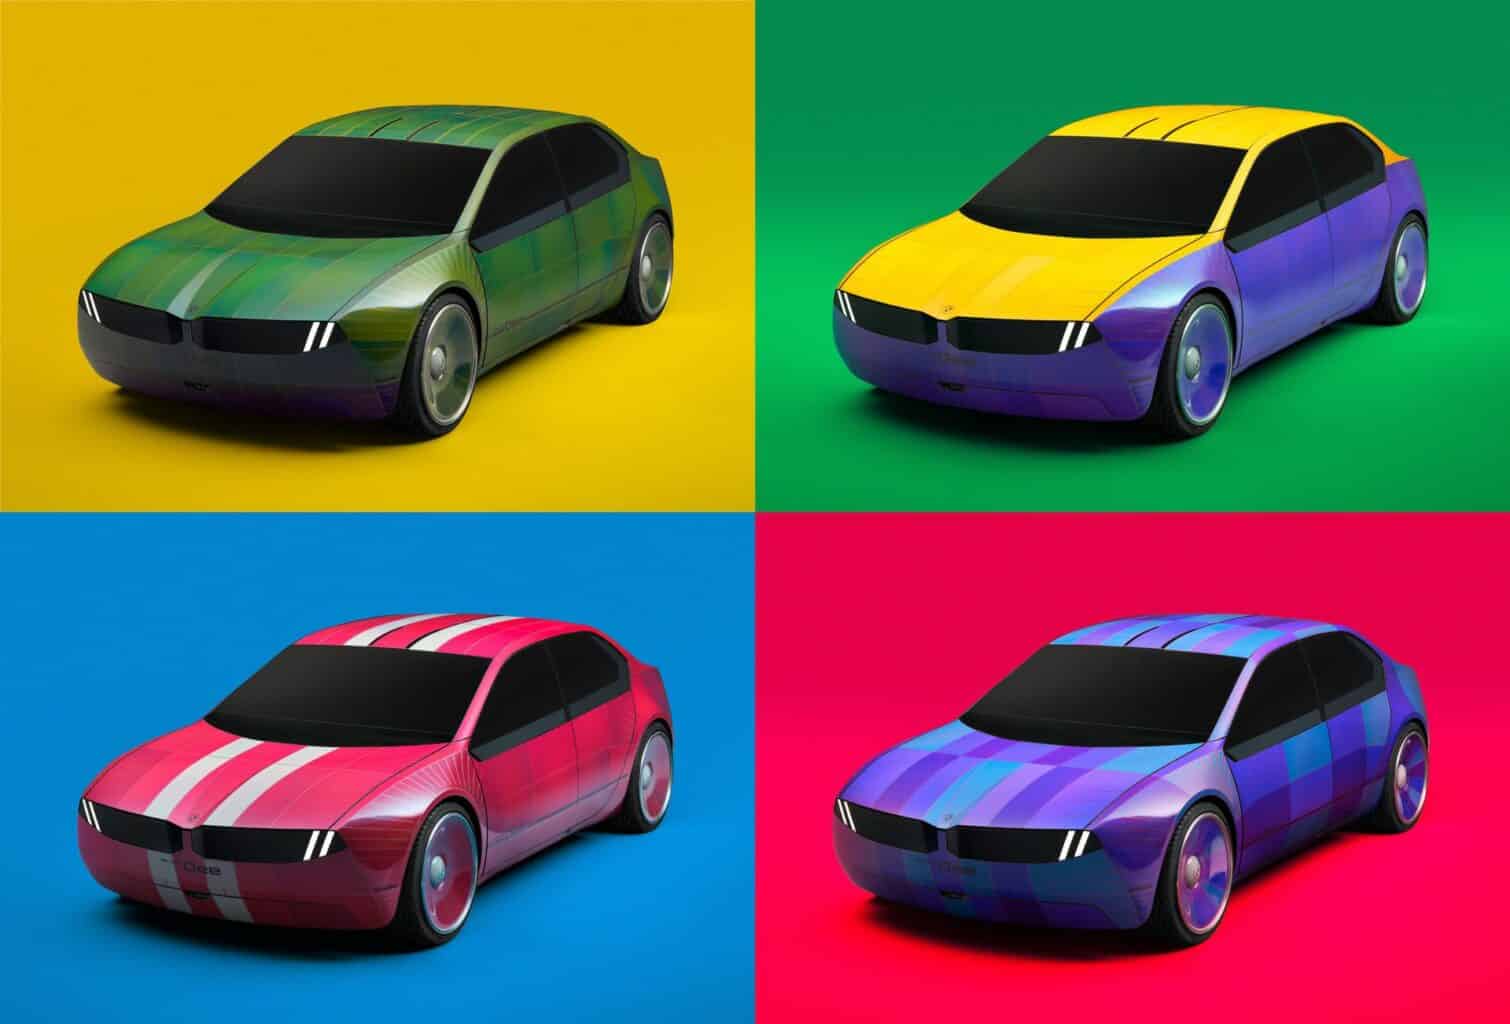 The BMW I Vision Dee color-changing car